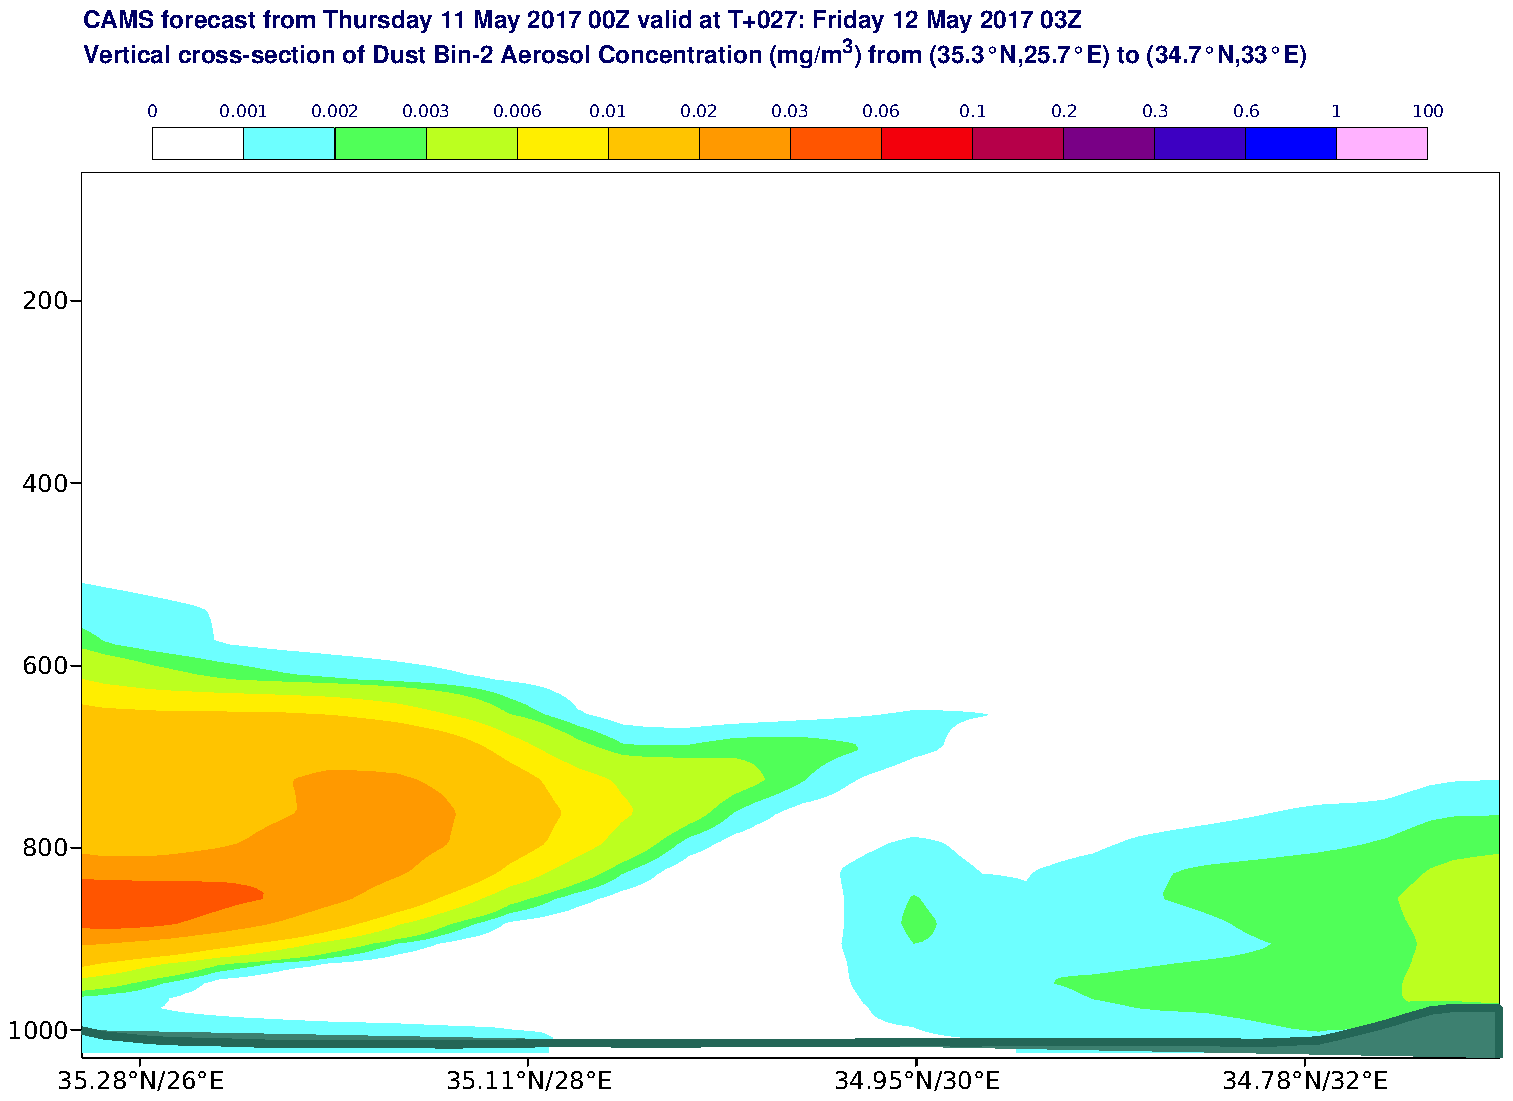 Vertical cross-section of Dust Bin-2 Aerosol Concentration (mg/m3) valid at T27 - 2017-05-12 03:00